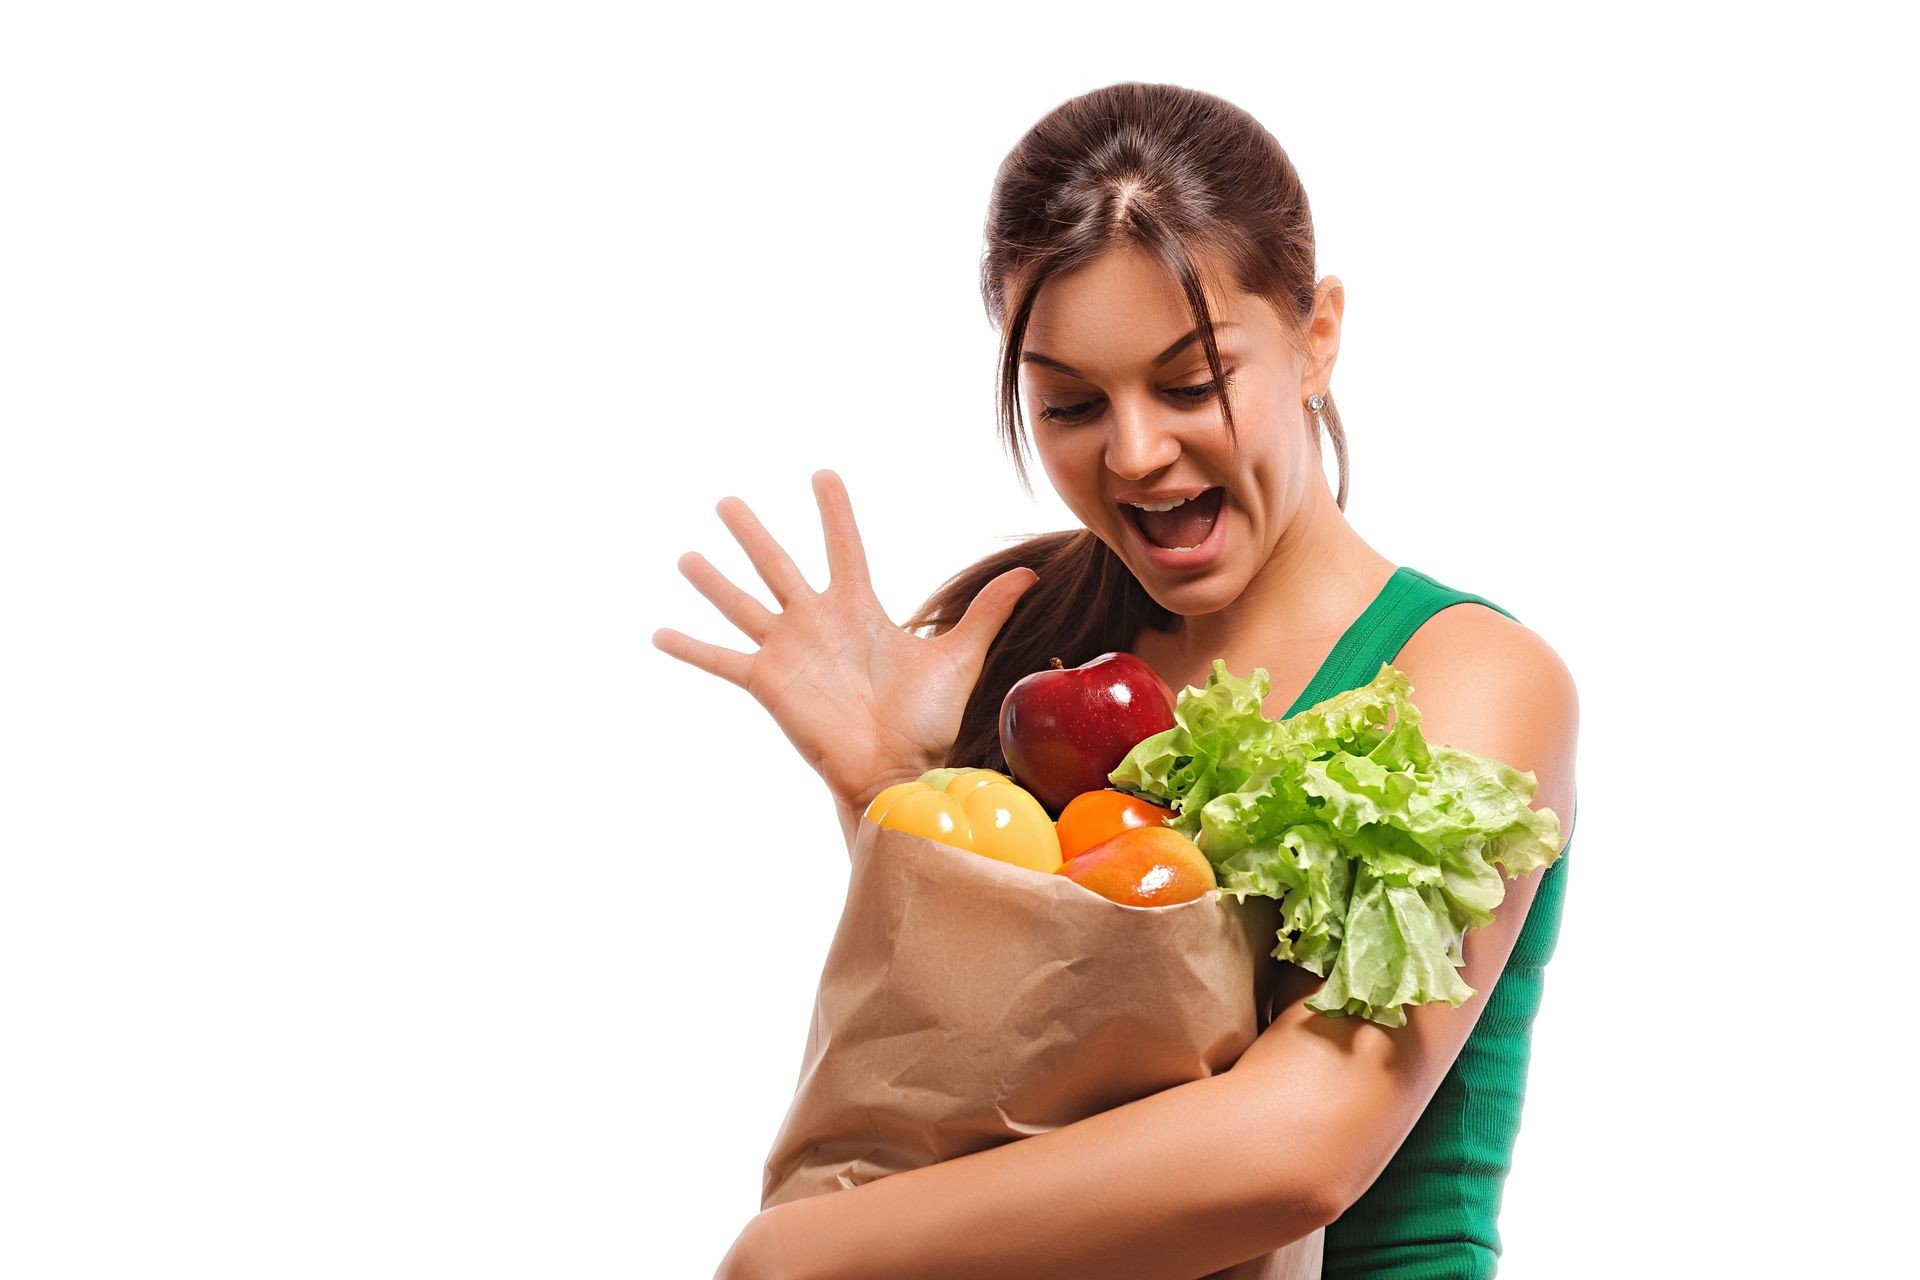 Happy young girl with a bag of fruit and vegetables enjoys a healthy diet. woman holding shopping paper bag with organic fresh food isolated on white background. 